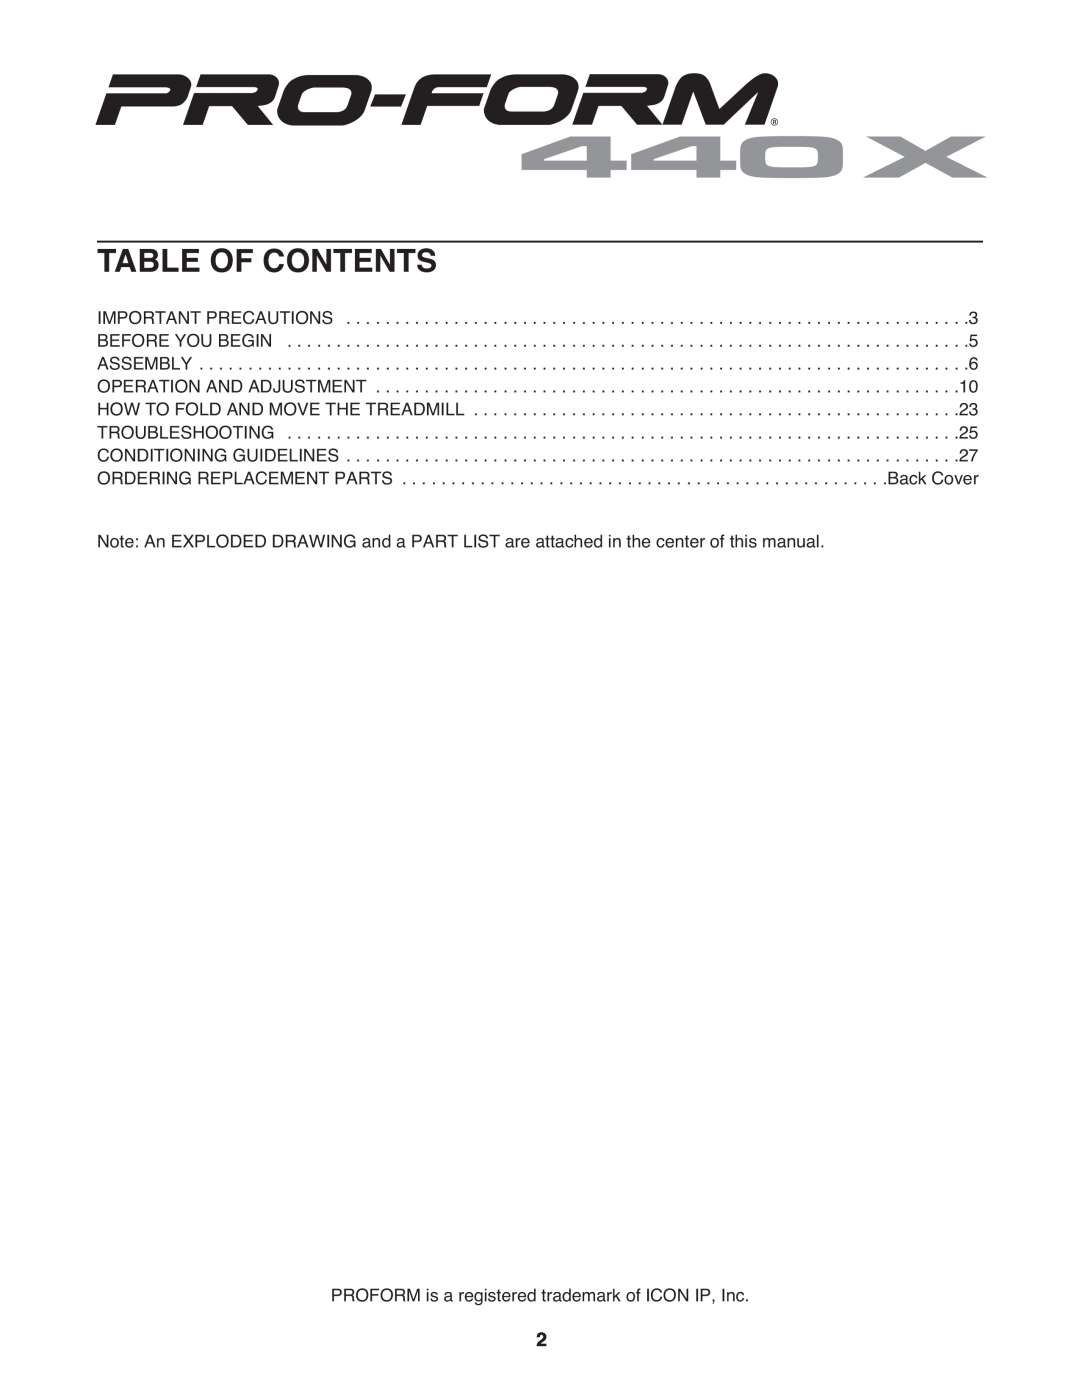 ProForm PMTL49305.0 user manual Table Of Contents, PROFORM is a registered trademark of ICON IP, Inc 